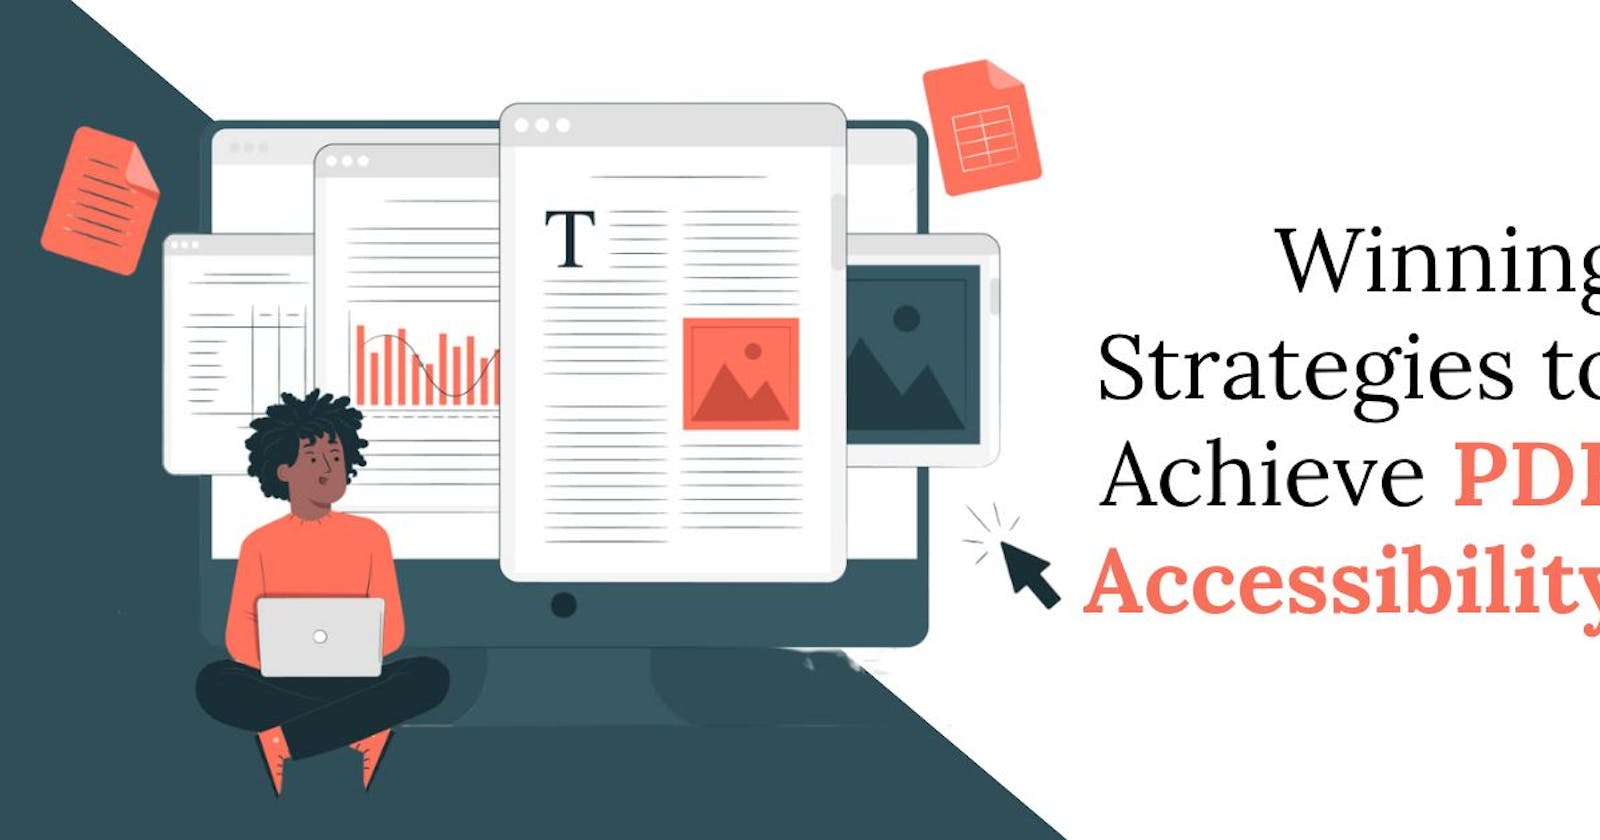 Winning Strategies to Achieve PDF Accessibility